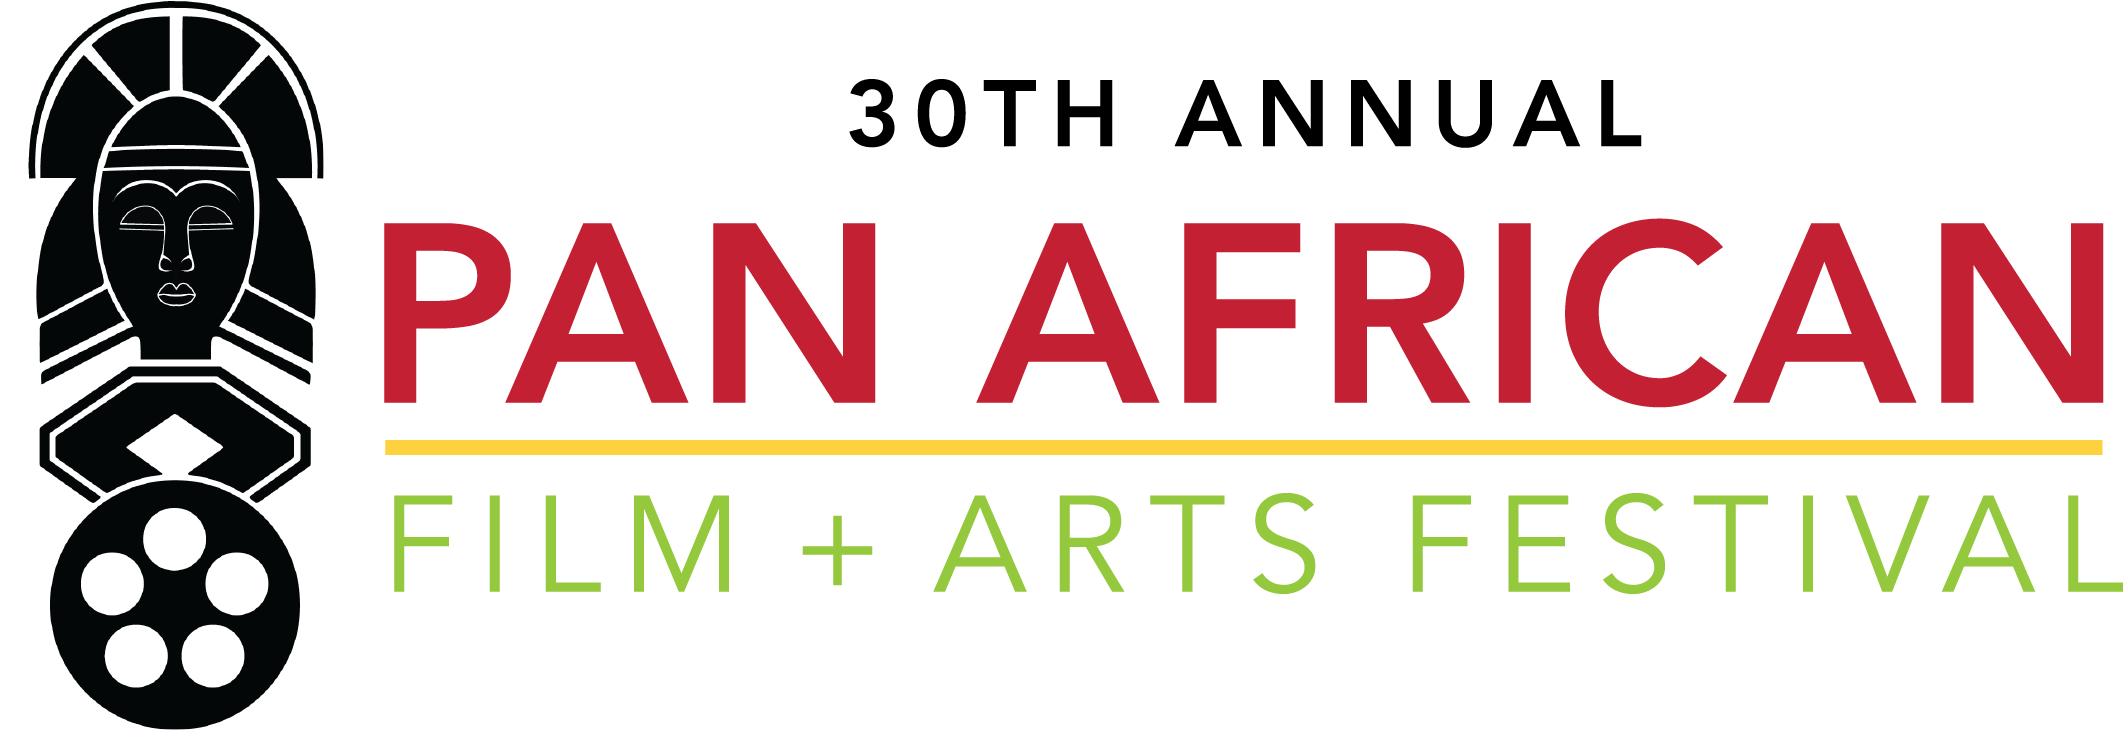 Pan African Film & Arts Festival (PAFF) Los Angeles April 19May 1, 2022.